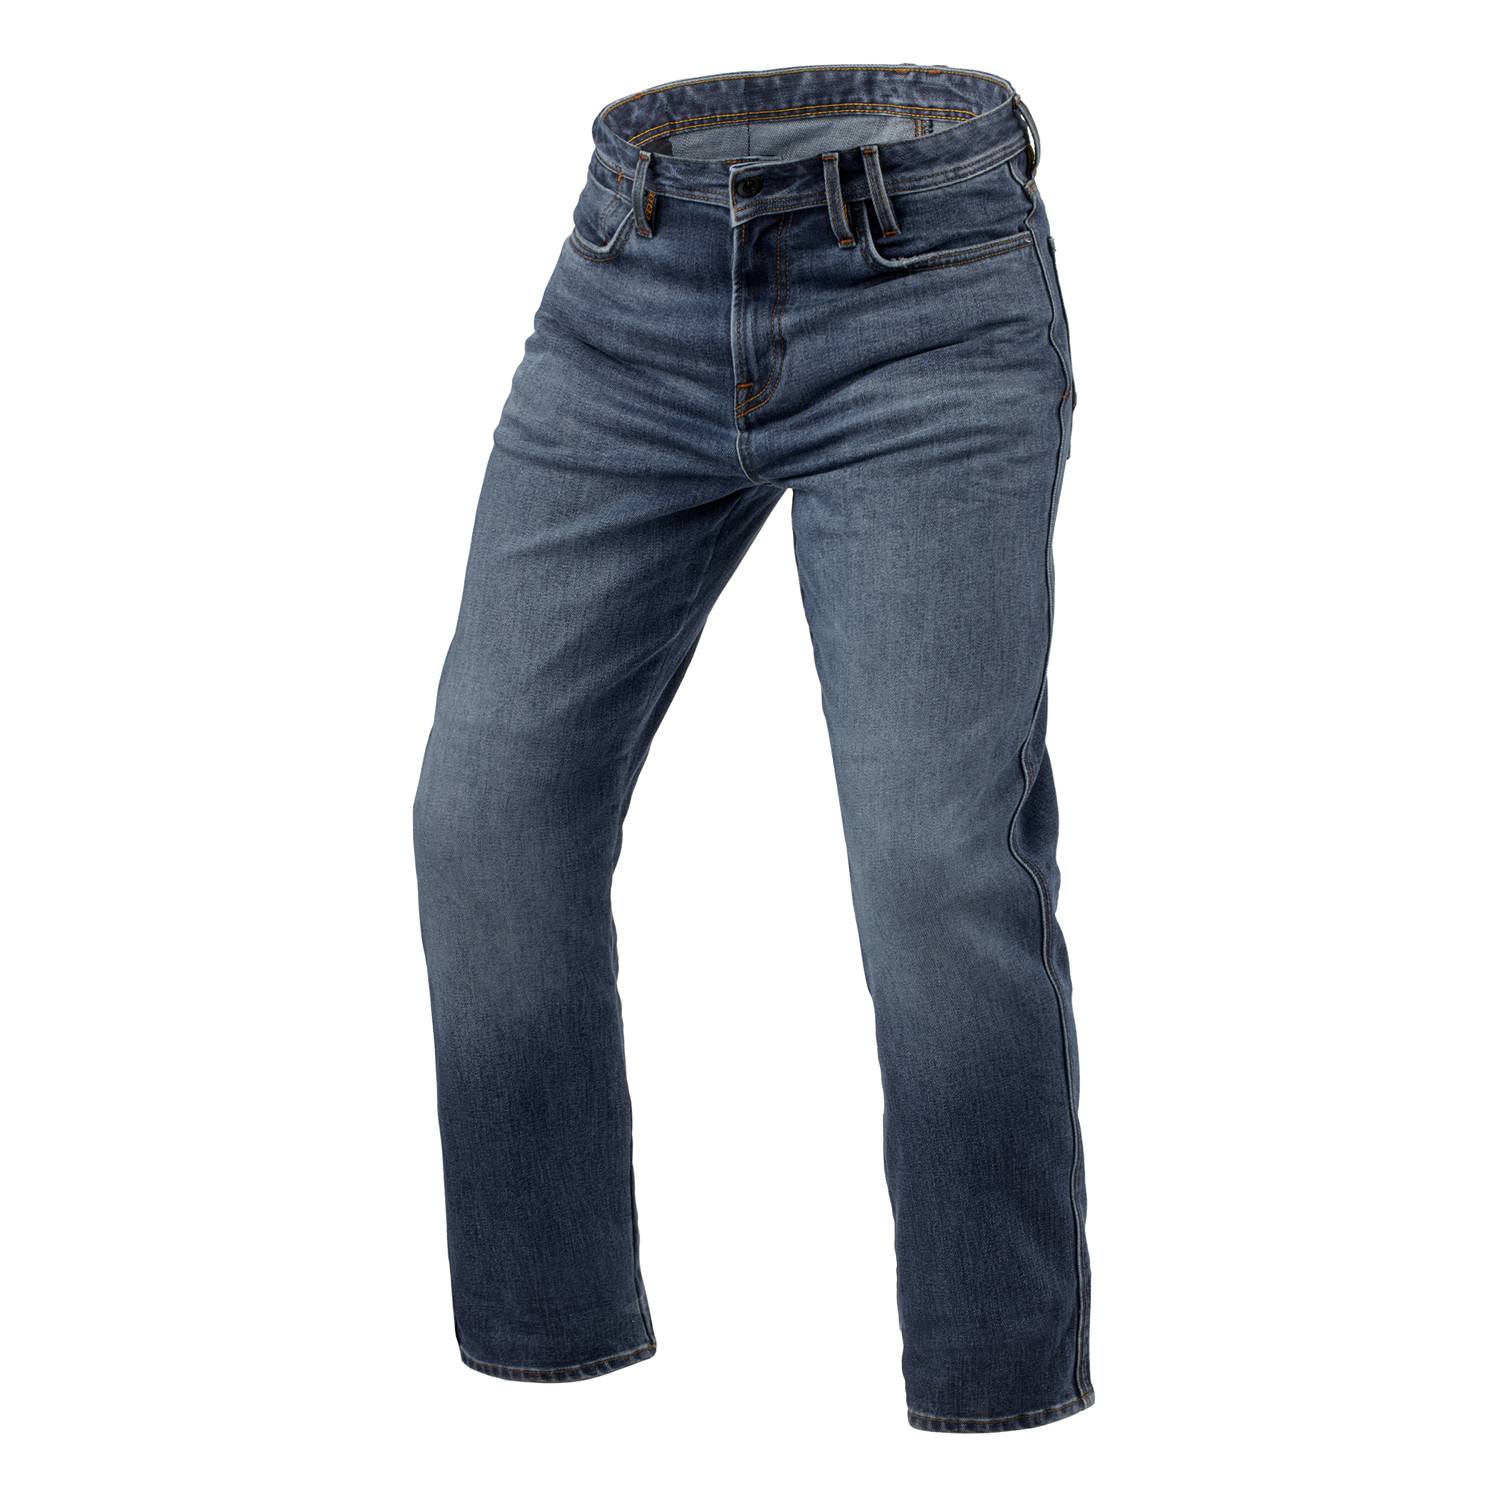 Image of REV'IT! Jeans Lombard 3 RF Mid Blue Stone L32 Motorcycle Jeans Size L32/W31 ID 8700001376037